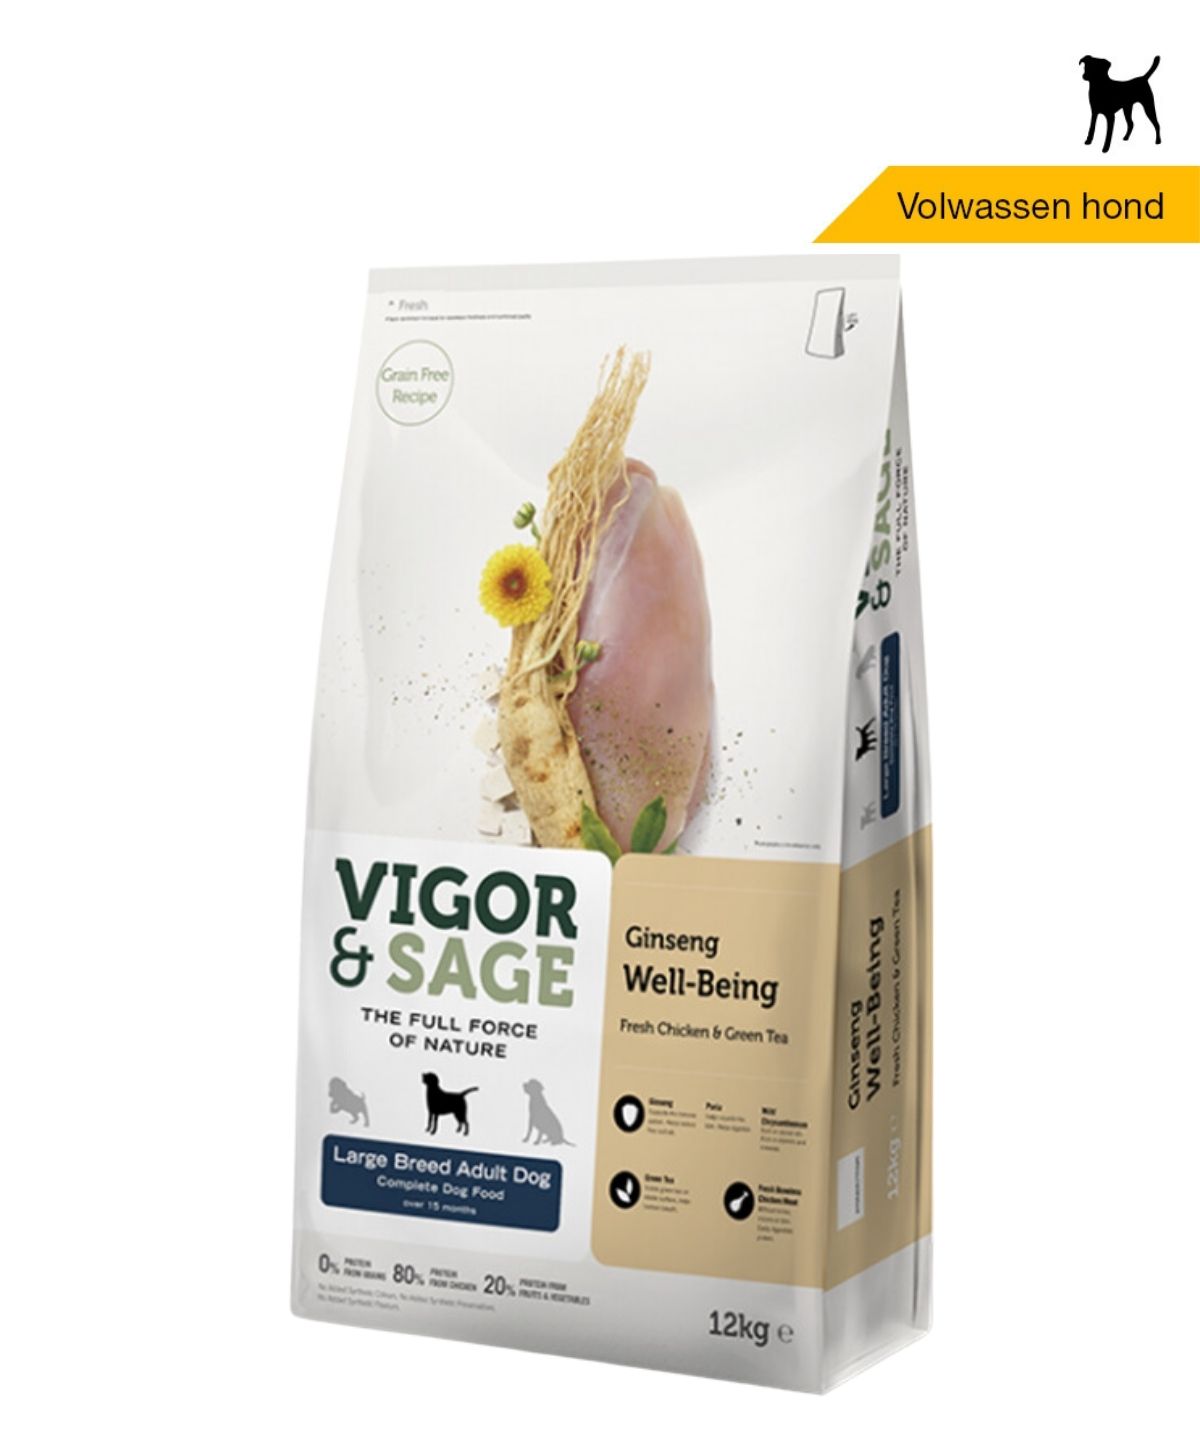 Vigor & Sage Ginseng Well Being - Large breed adult